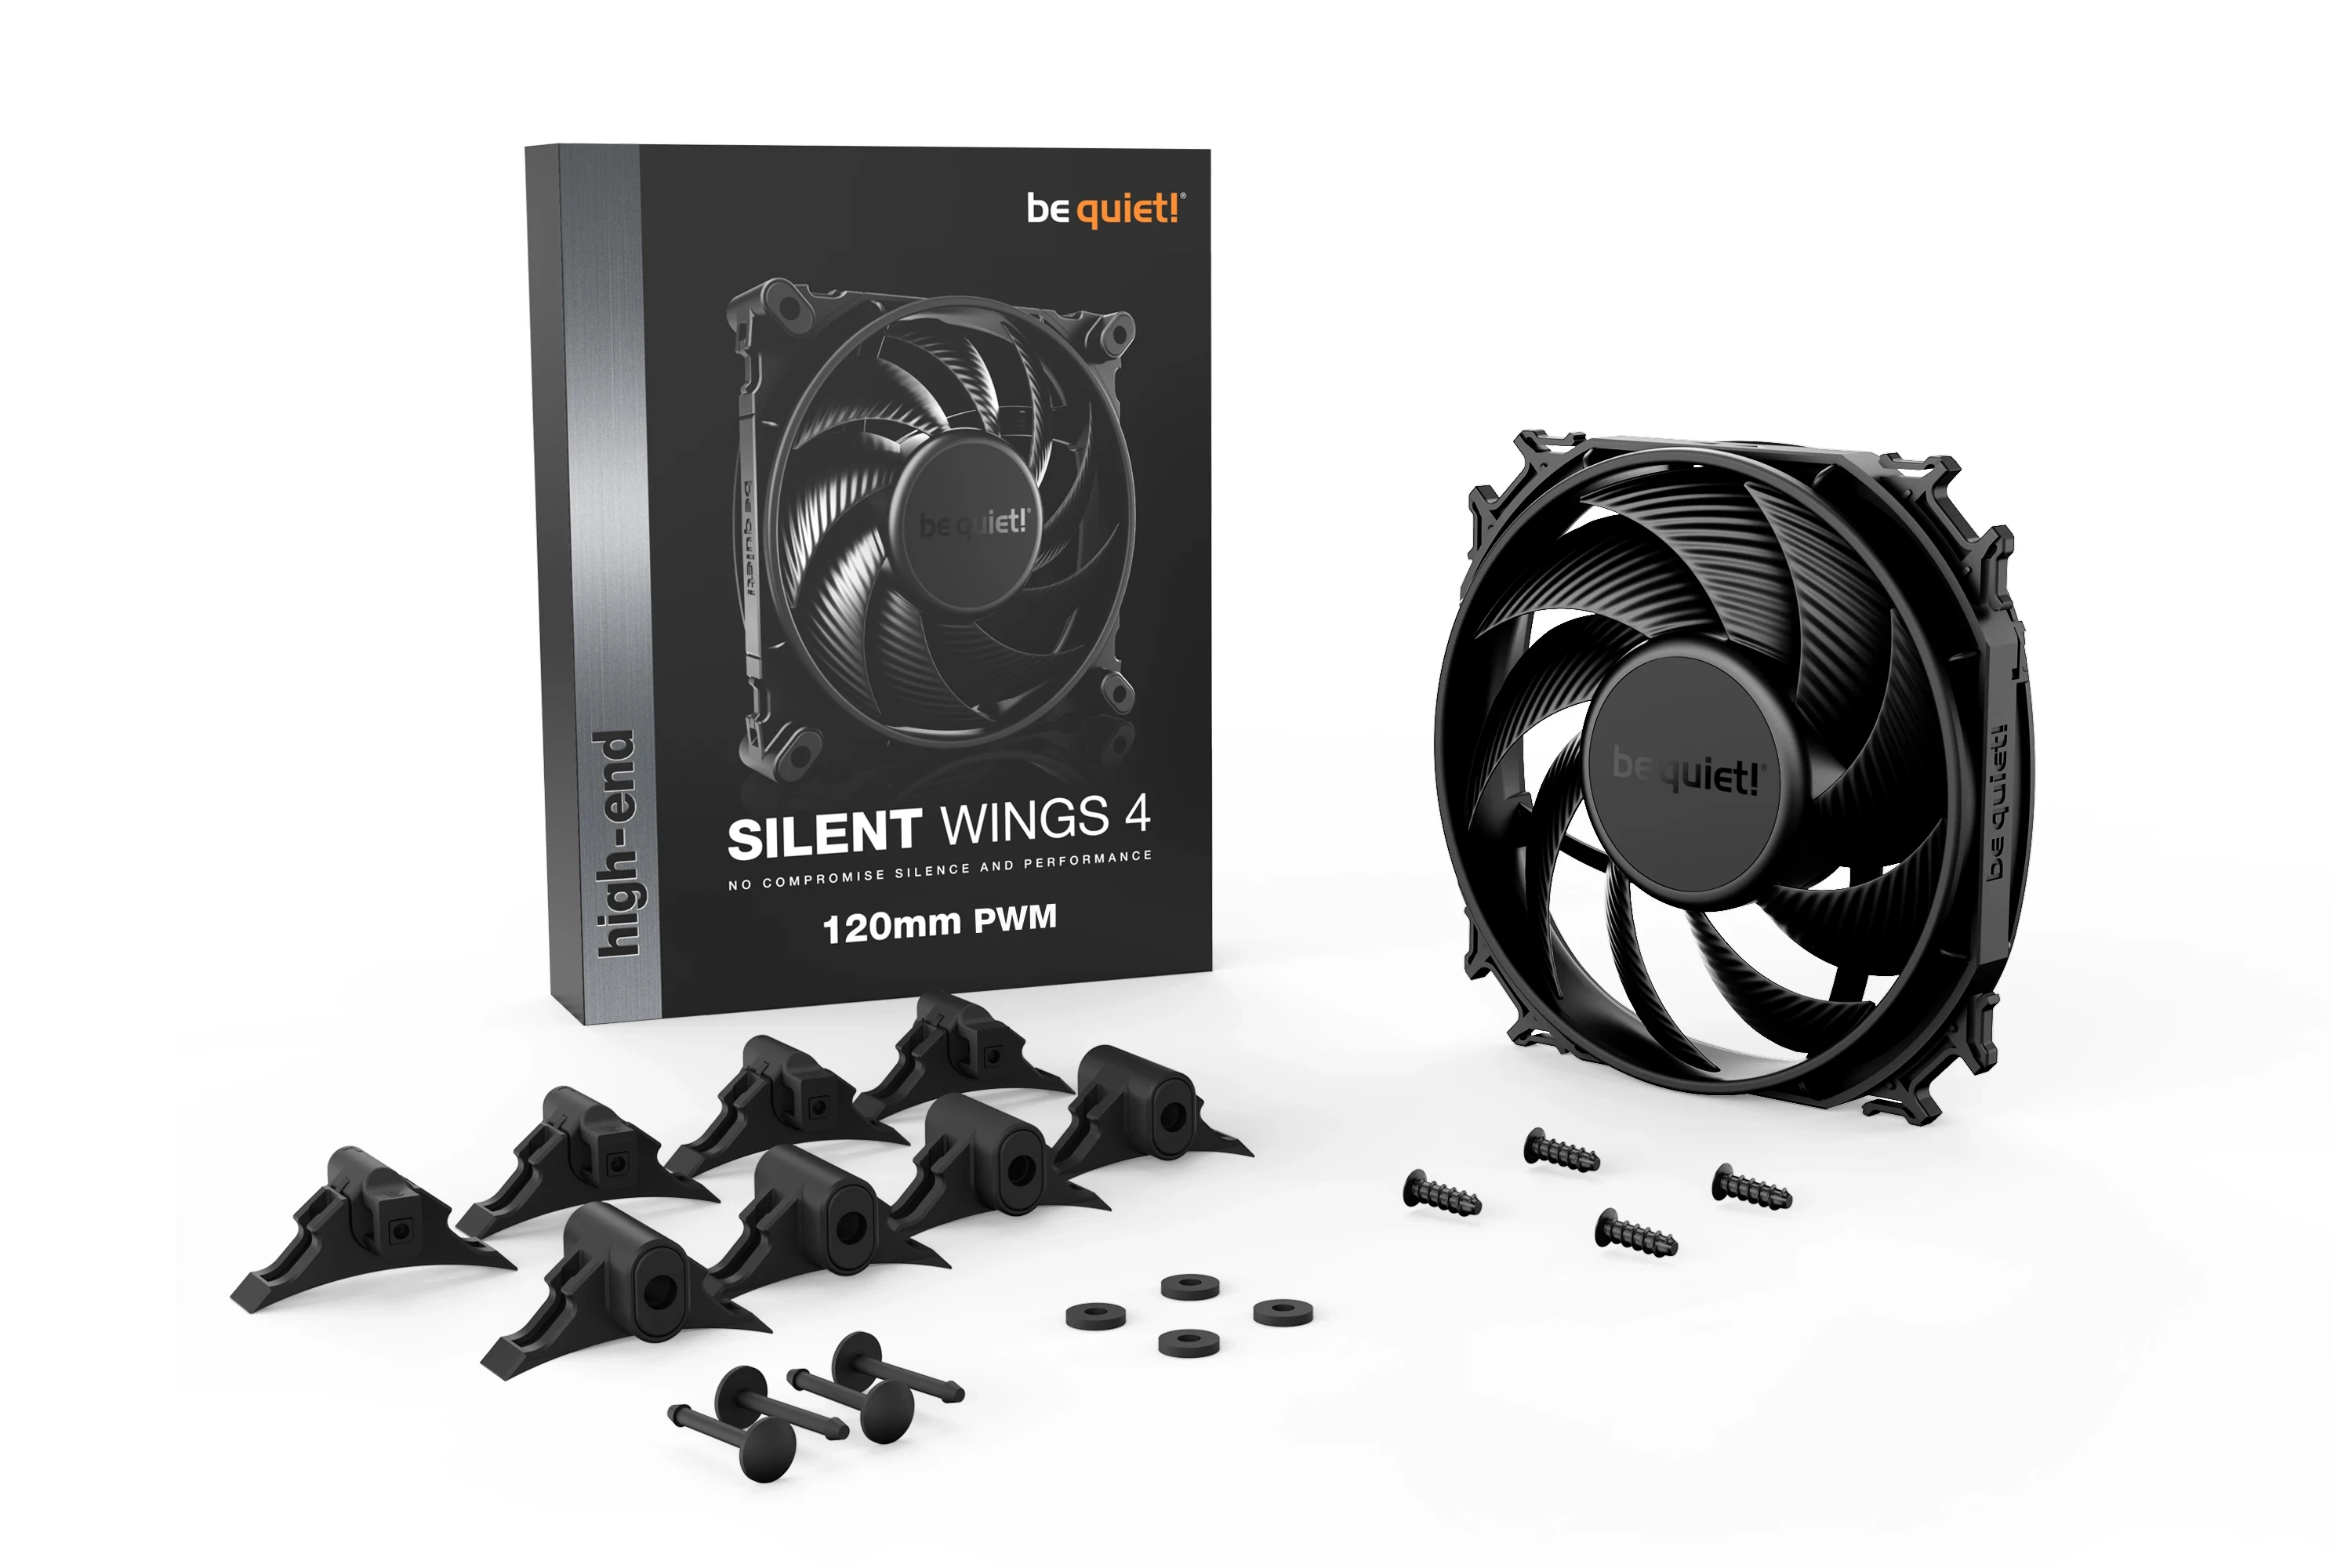 be quiet! SILENT WINGS 4 120mm PWM, 4-pin, Fan speed: 1600RPM, Rubber & hard plastic mountings, 18.9 db(A), 5 years warranty - image 3